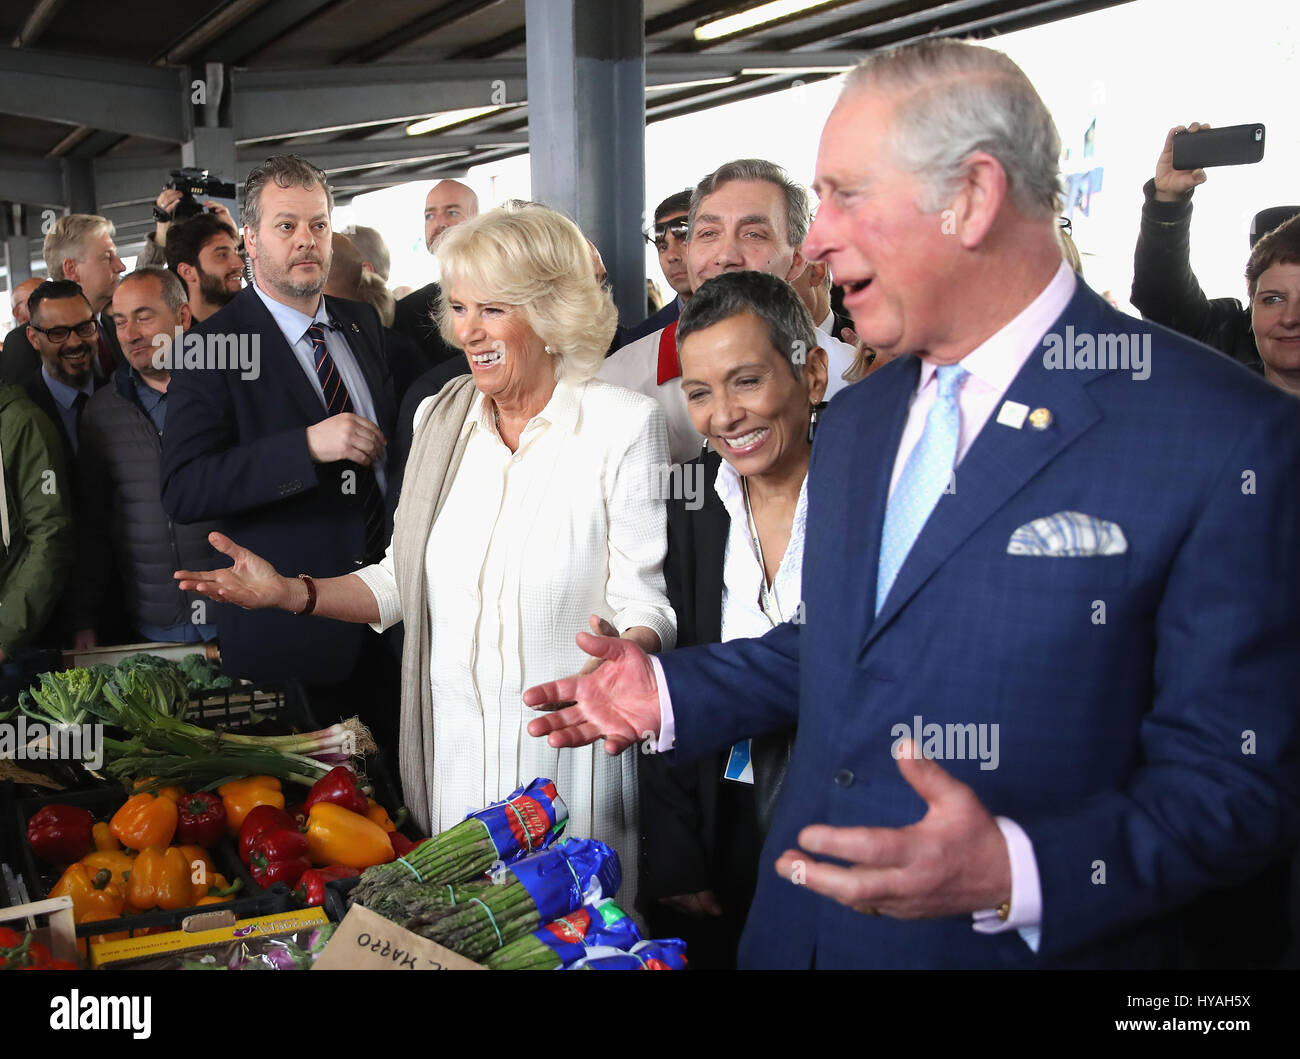 The Prince of Wales and the Duchess of Cornwall visit Sant'Ambrogio Market to celebrate the Slow Food movement and meet local food producers of the Abruzzo region and areas affected by the Italian earthquakes of 2016, on the sixth day of his nine-day European tour. Stock Photo